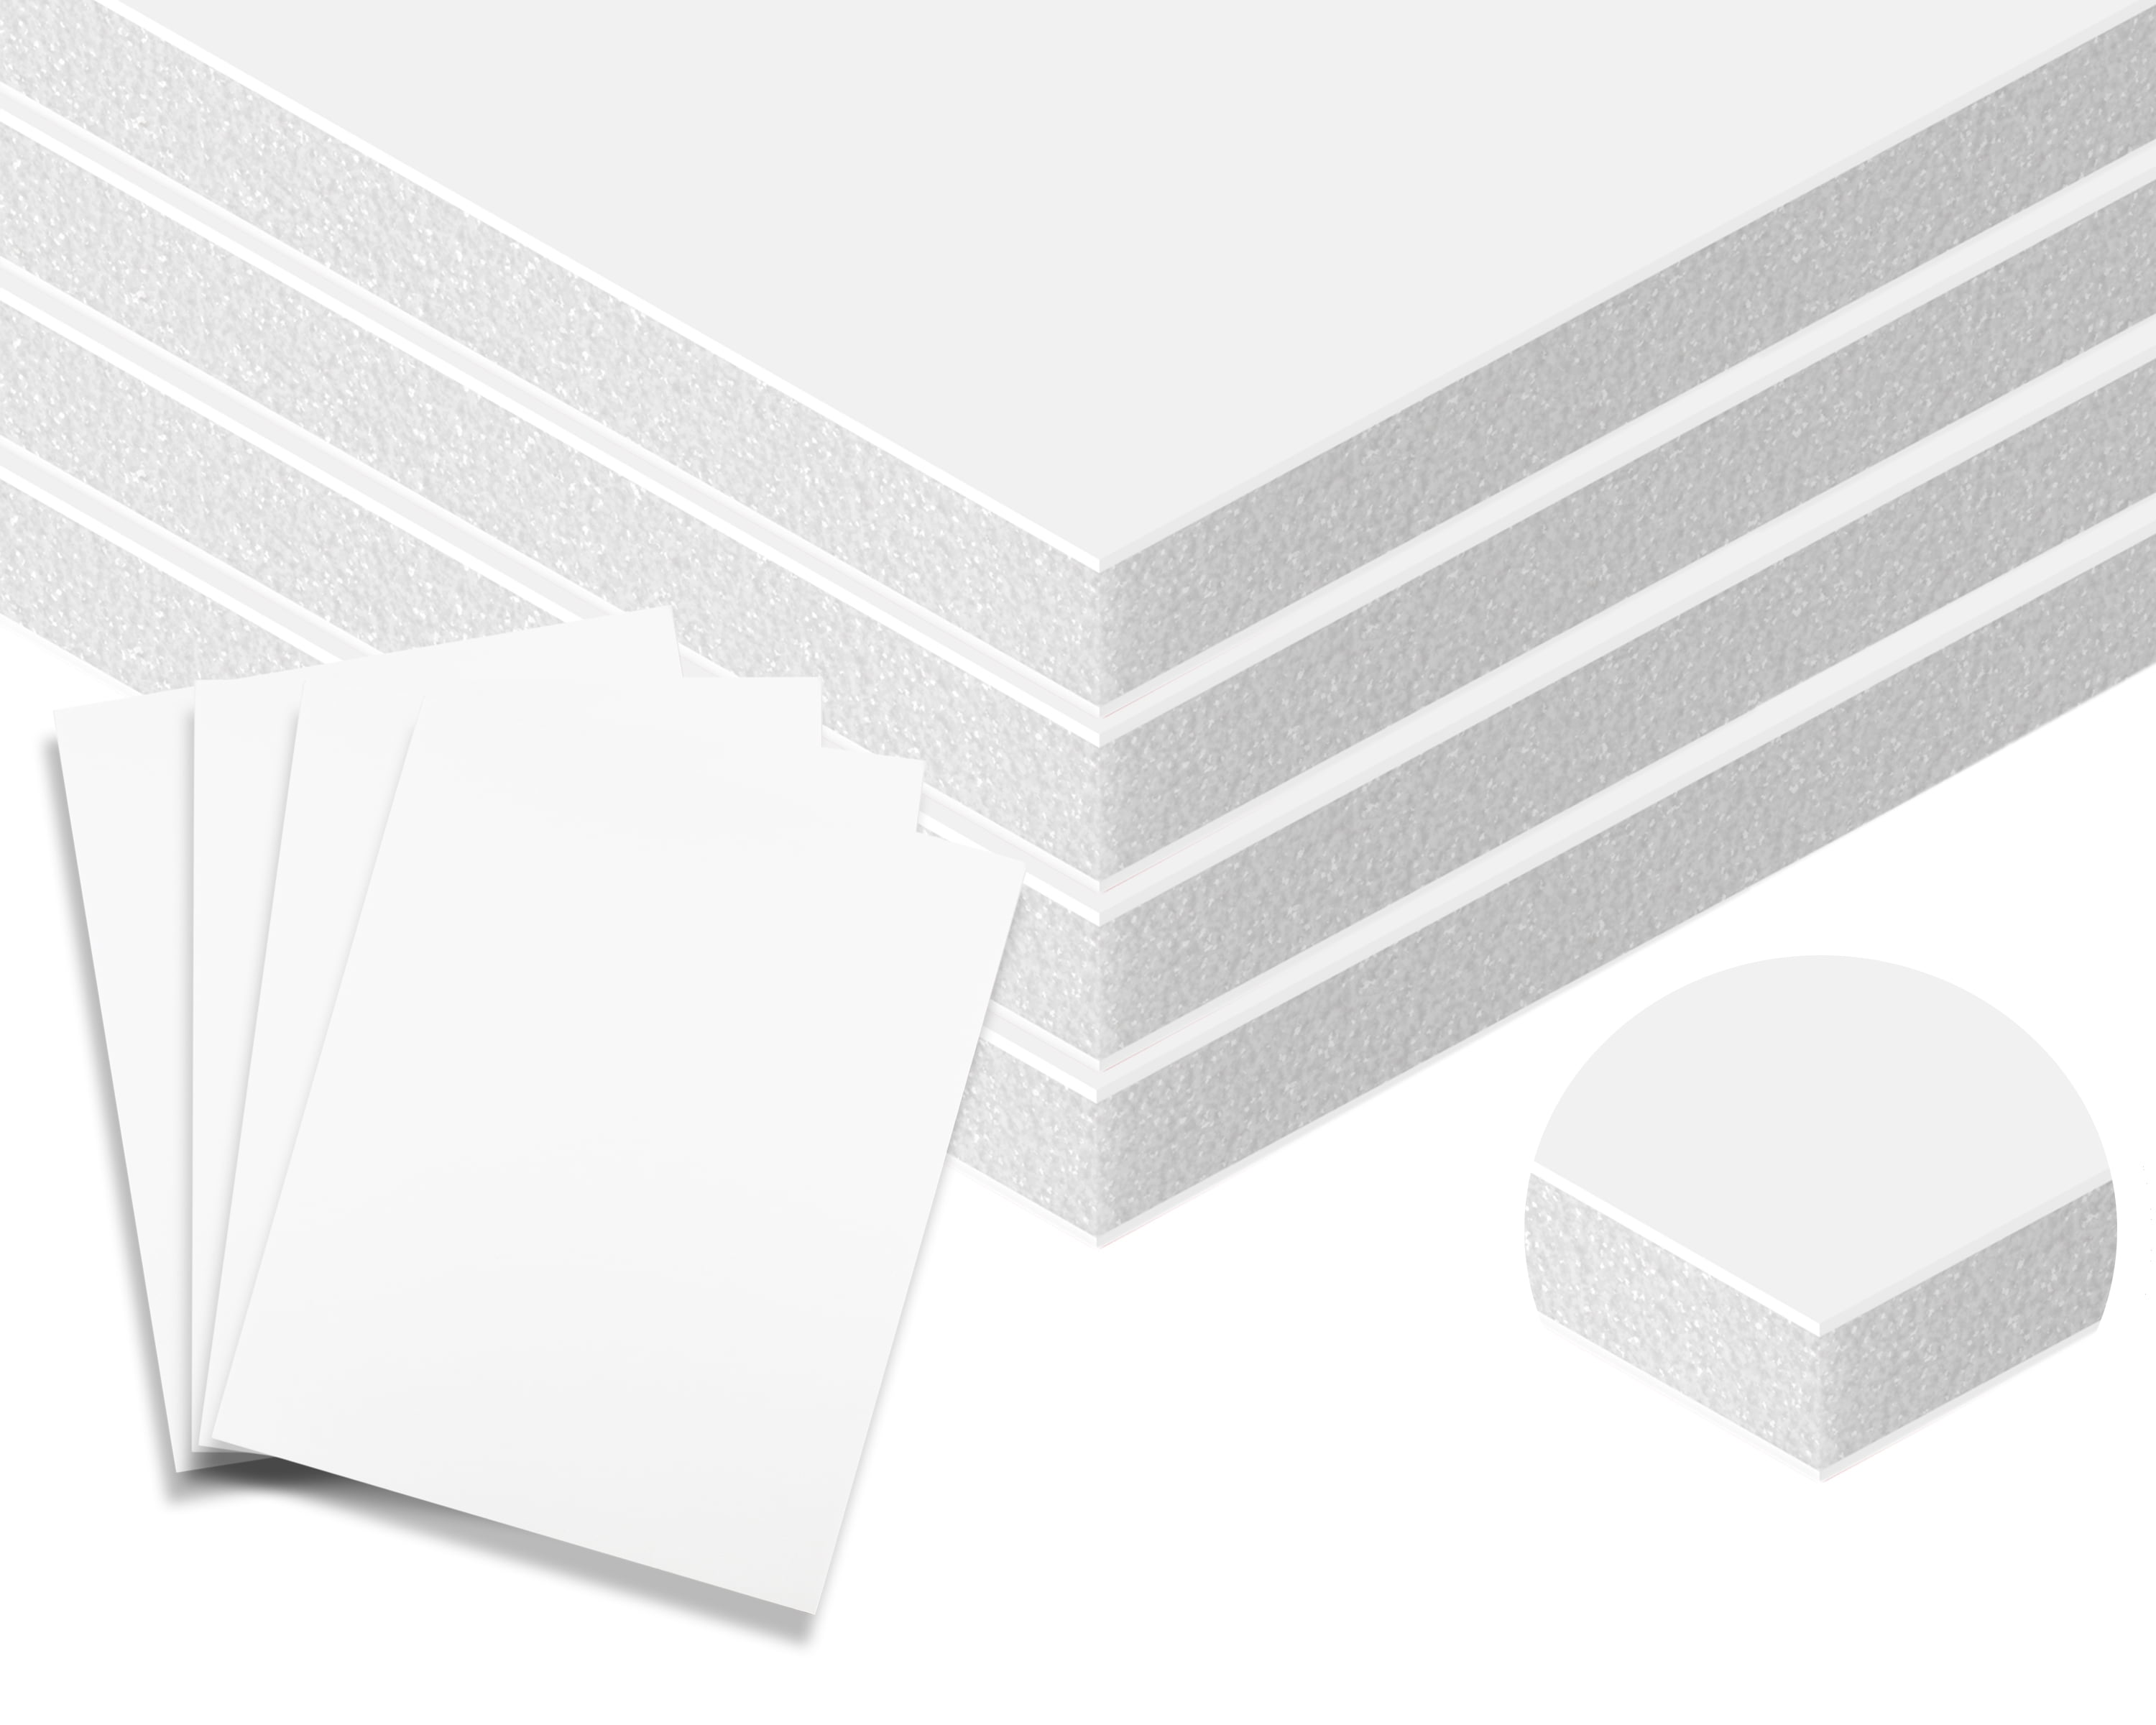 Foam Core Backing Board 3/8 White 16x20- 100 Pack. Many Sizes Available.  Acid Free Buffered Craft Poster Board for Signs, Presentations, School